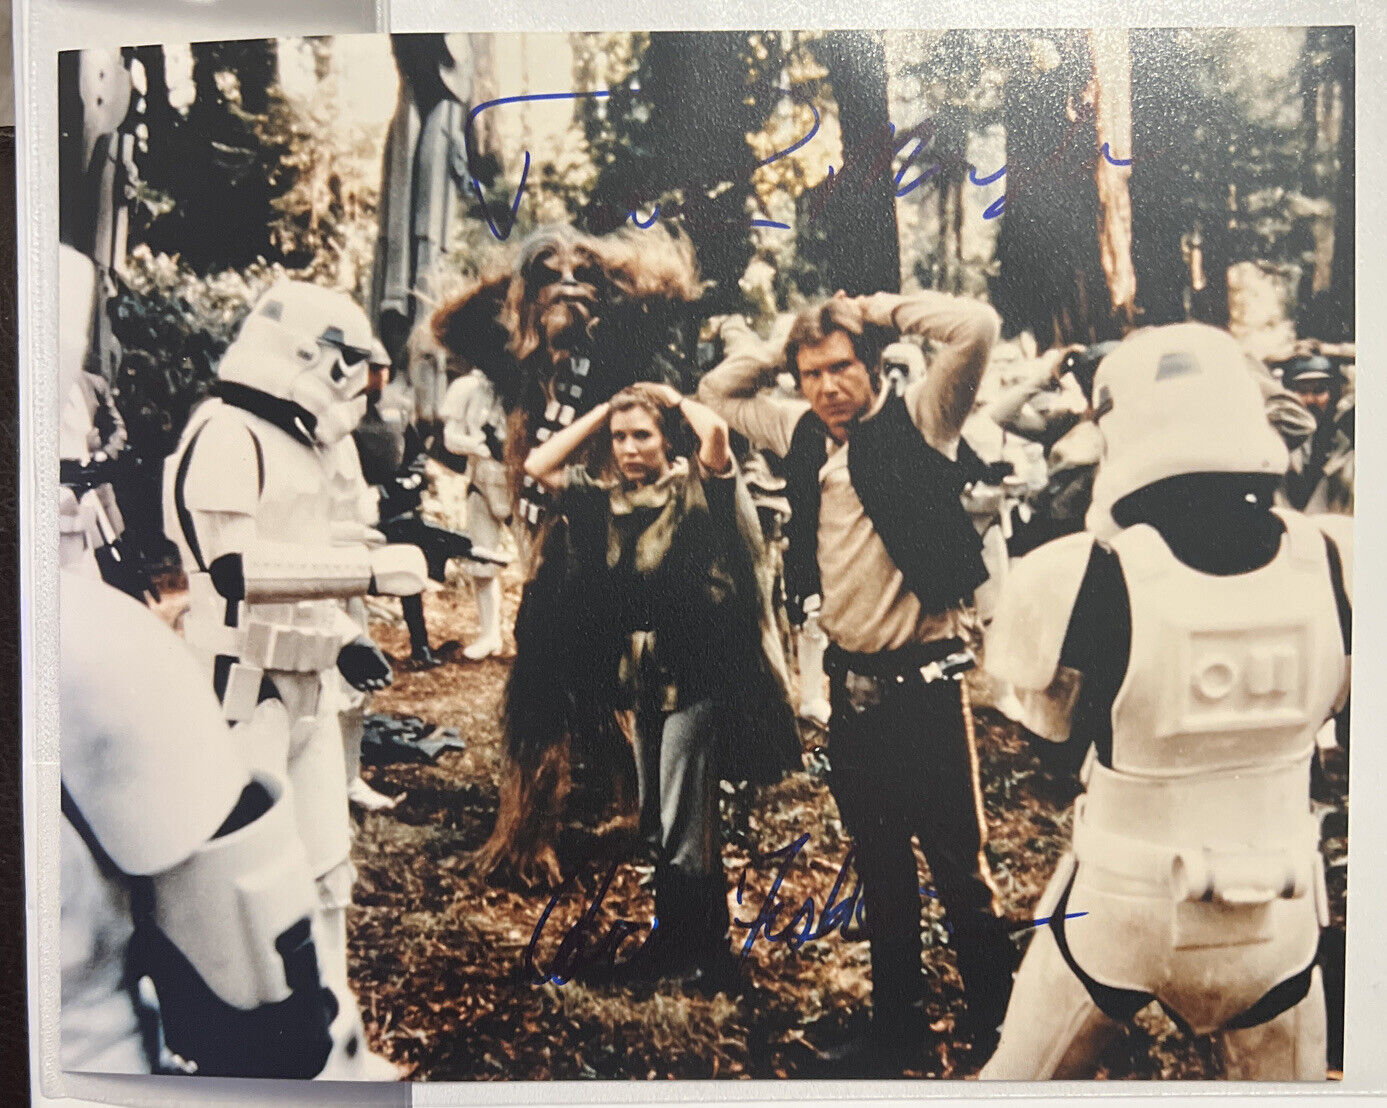 Star Wars ROTJ Carrie Fisher & Peter Mayhew Signed 8x10 With COA